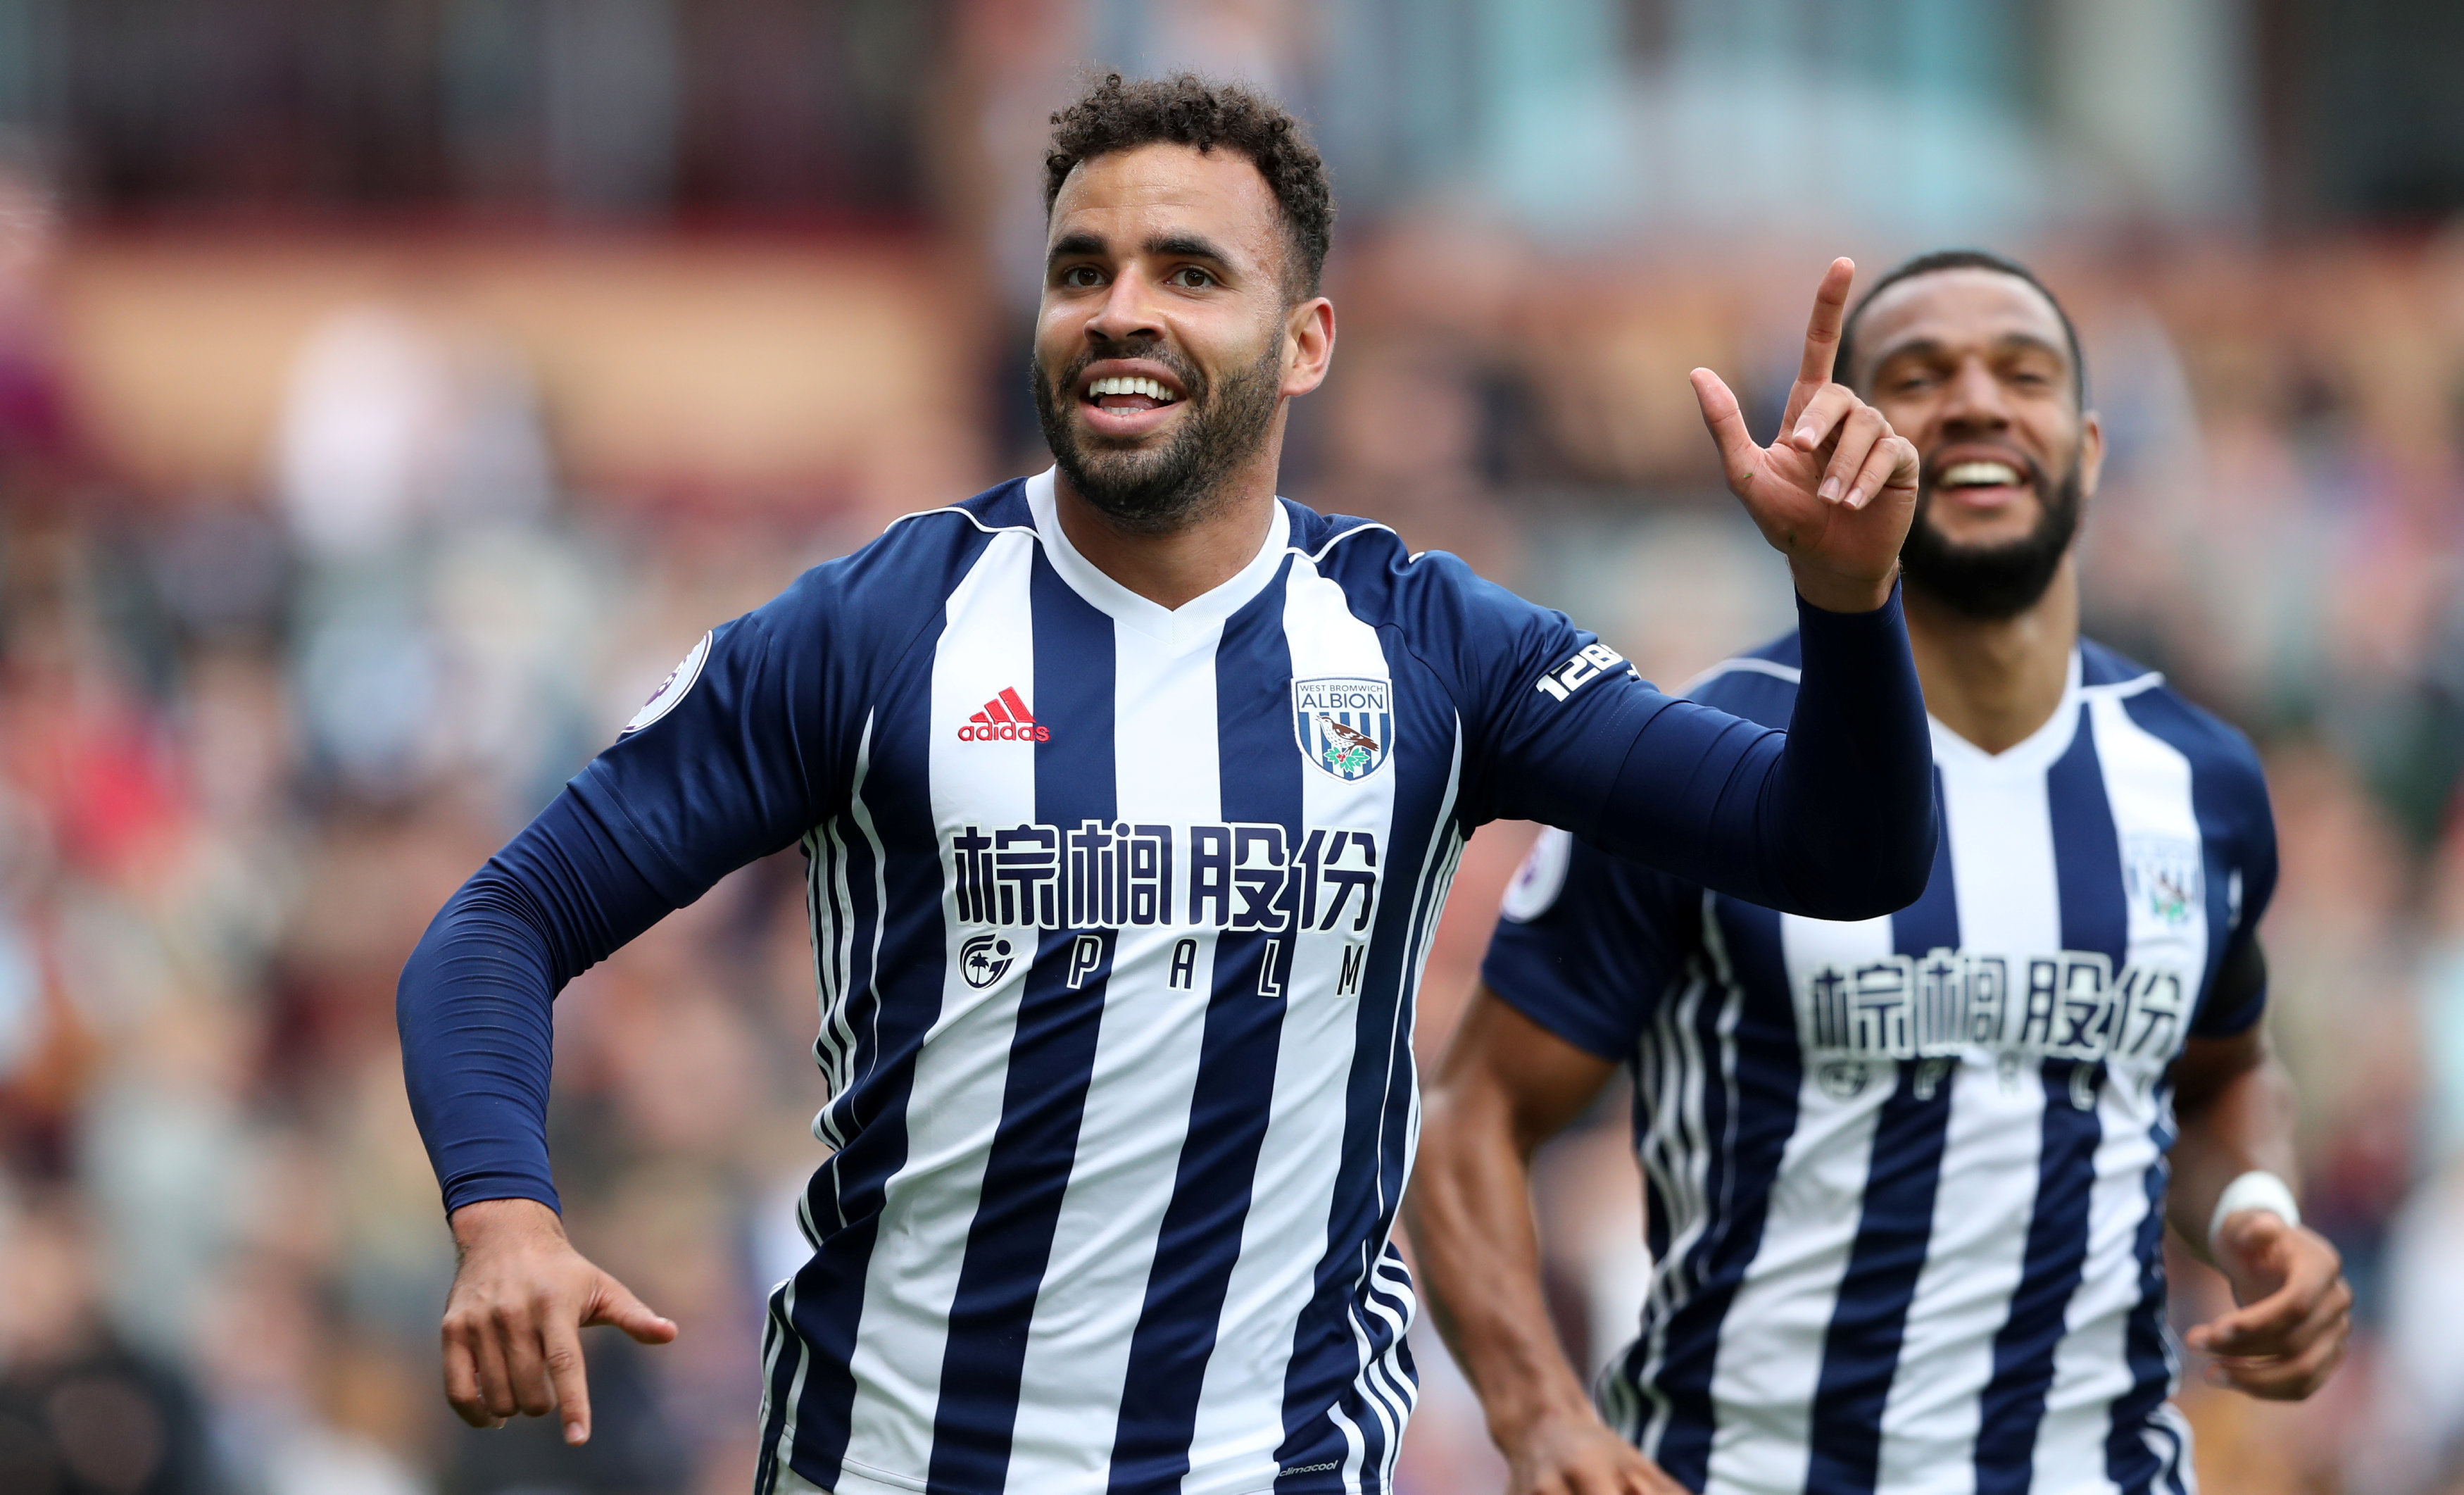 Football: Robson-Kanu gets winner, then red card as West Brom win at Burnley